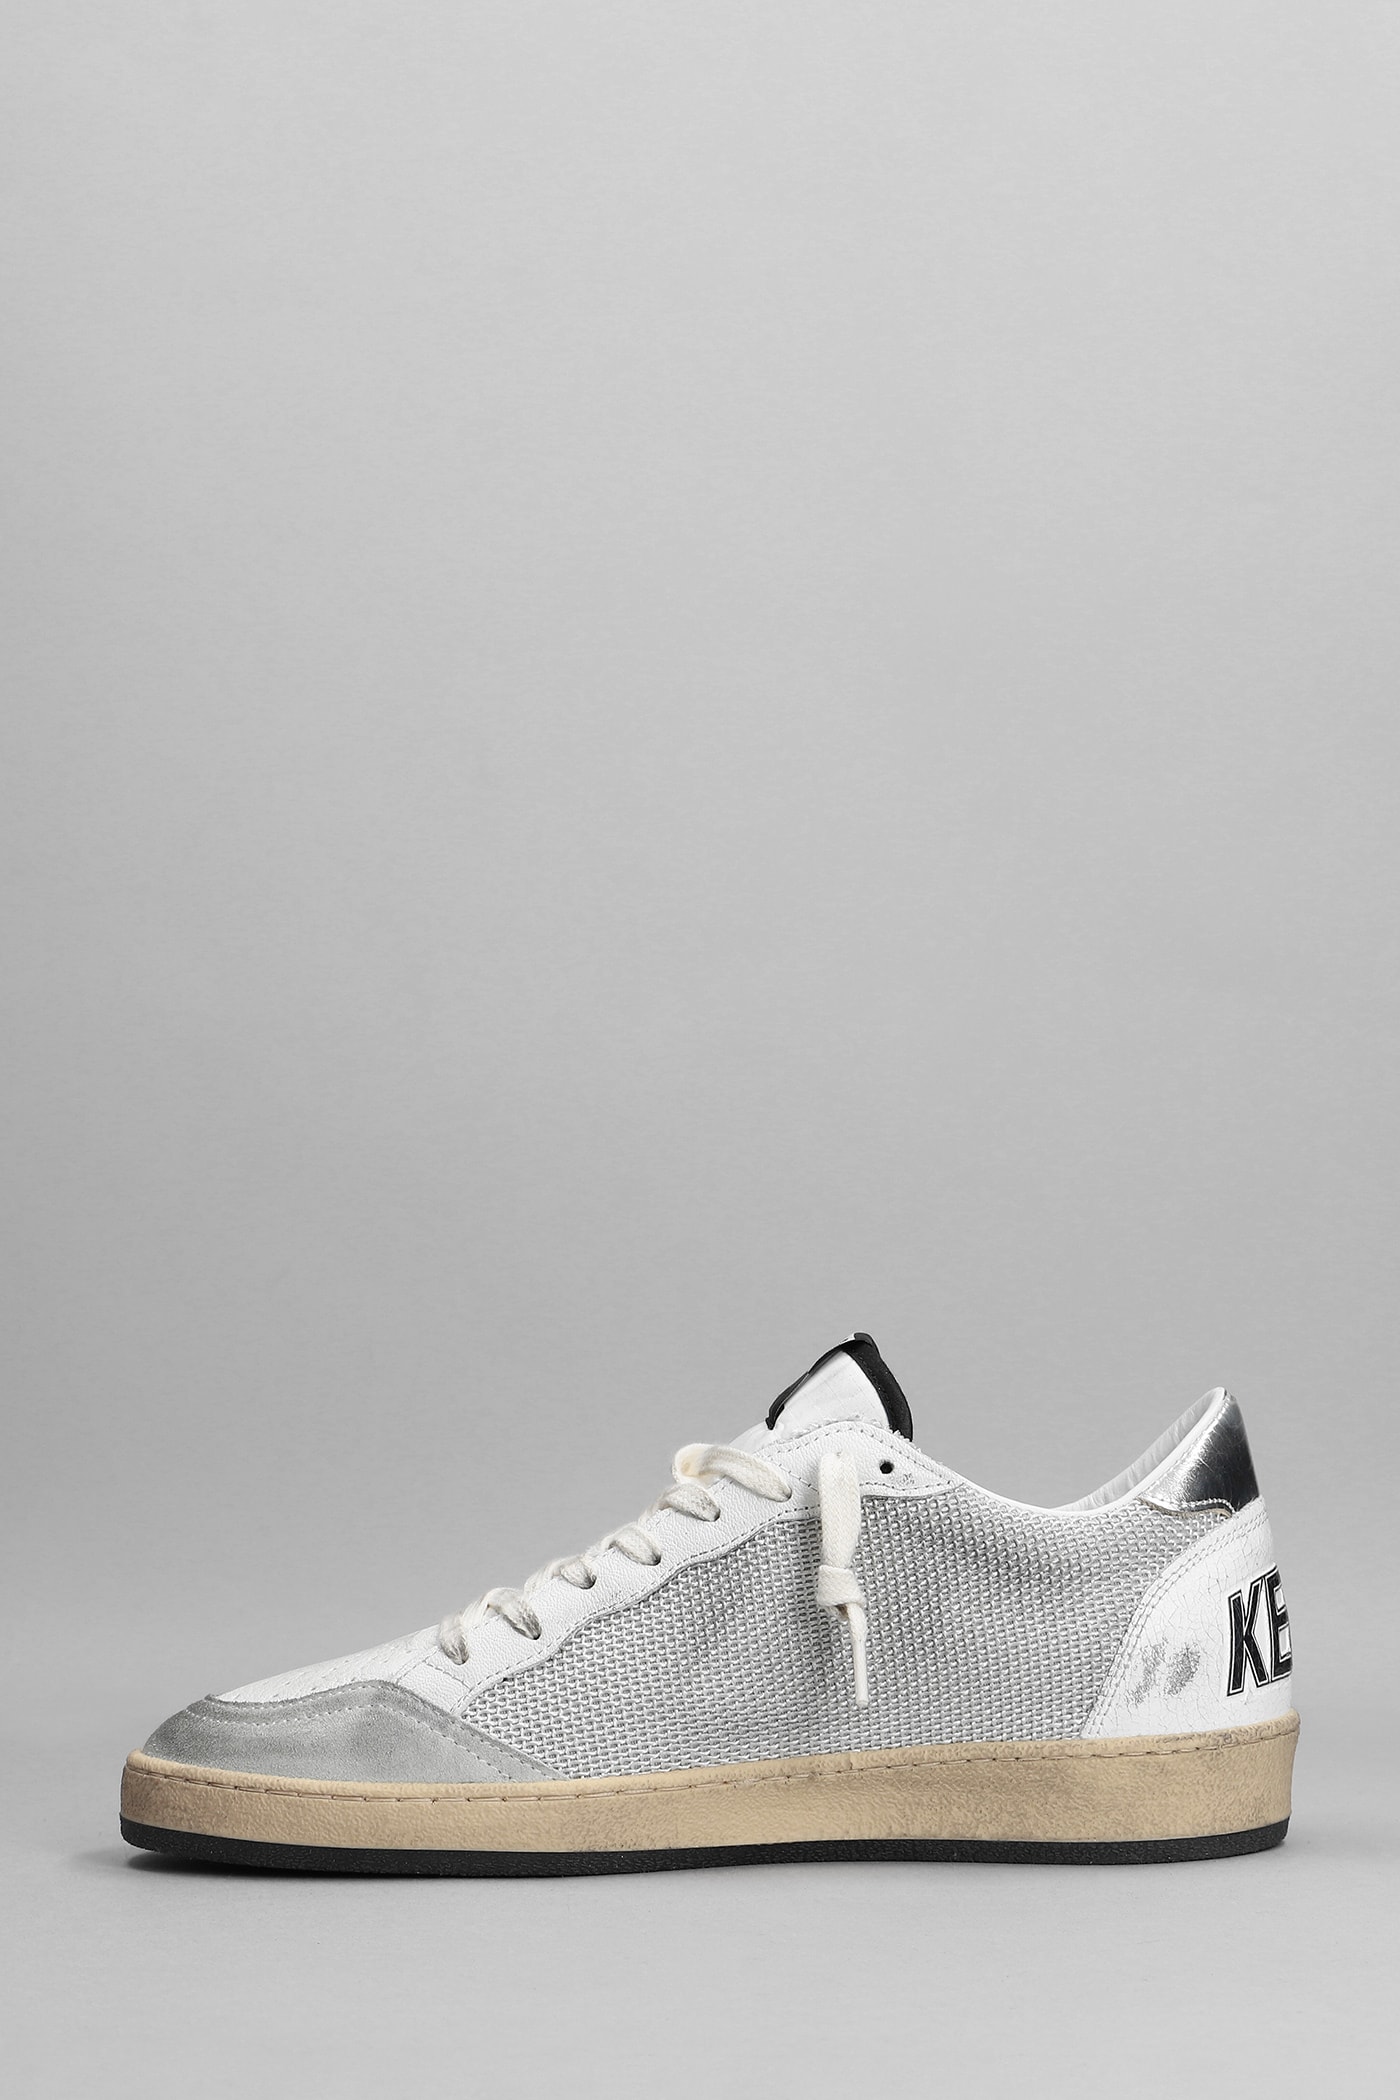 Shop Golden Goose Ball Star Sneakers In White Leather And Fabric